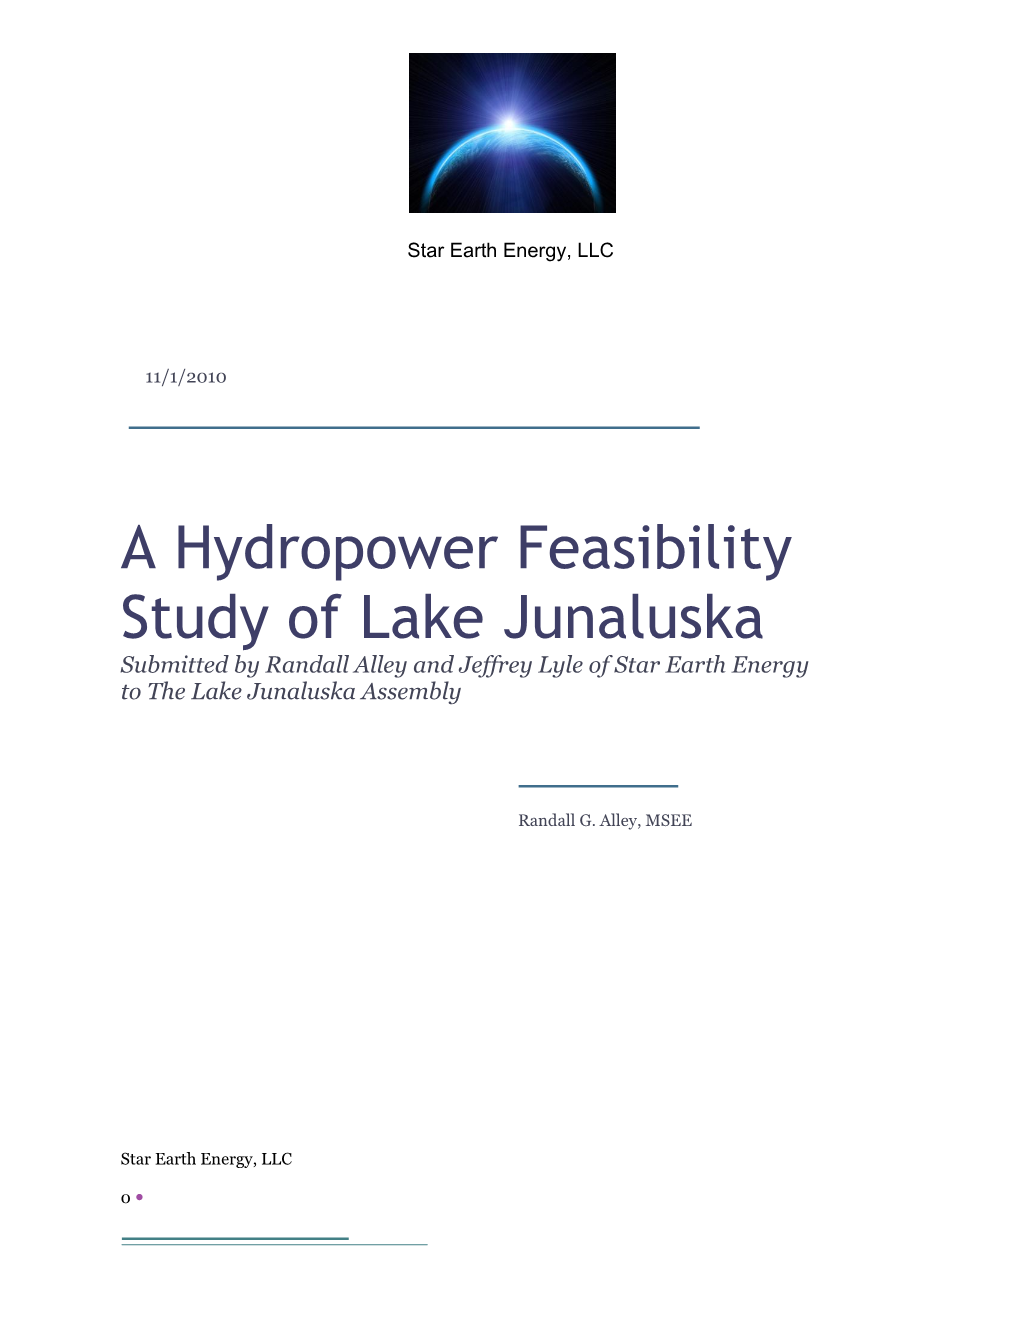 A Hydropower Feasibility Study of Lake Junaluska Submitted by Randall Alley and Jeffrey Lyle of Star Earth Energy to the Lake Junaluska Assembly